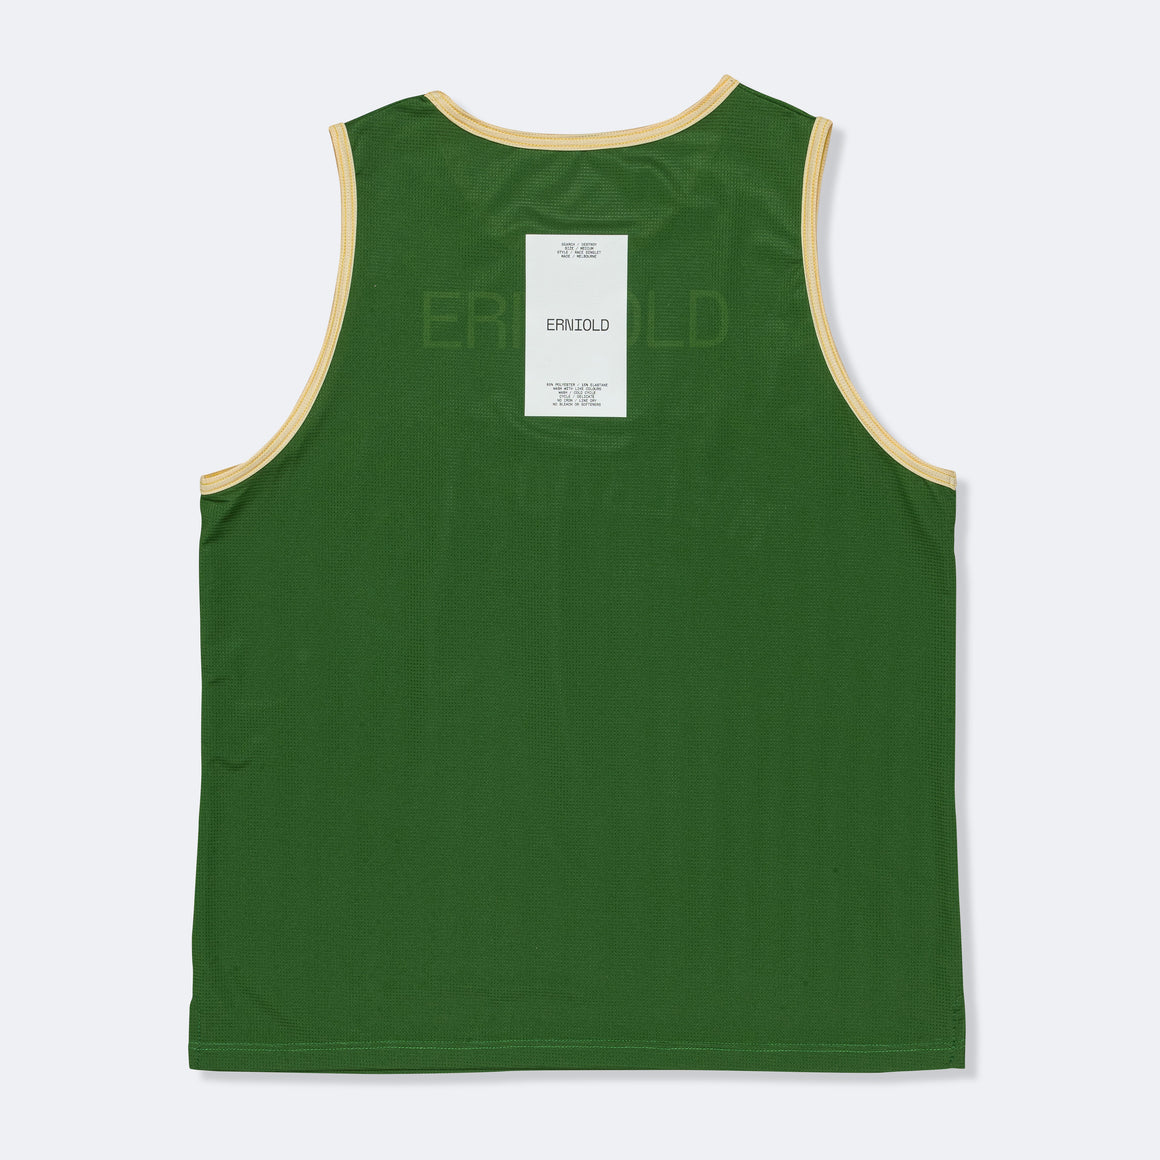 Erniold - Womens Melbourne Race Singlet - Green - Up There Athletics